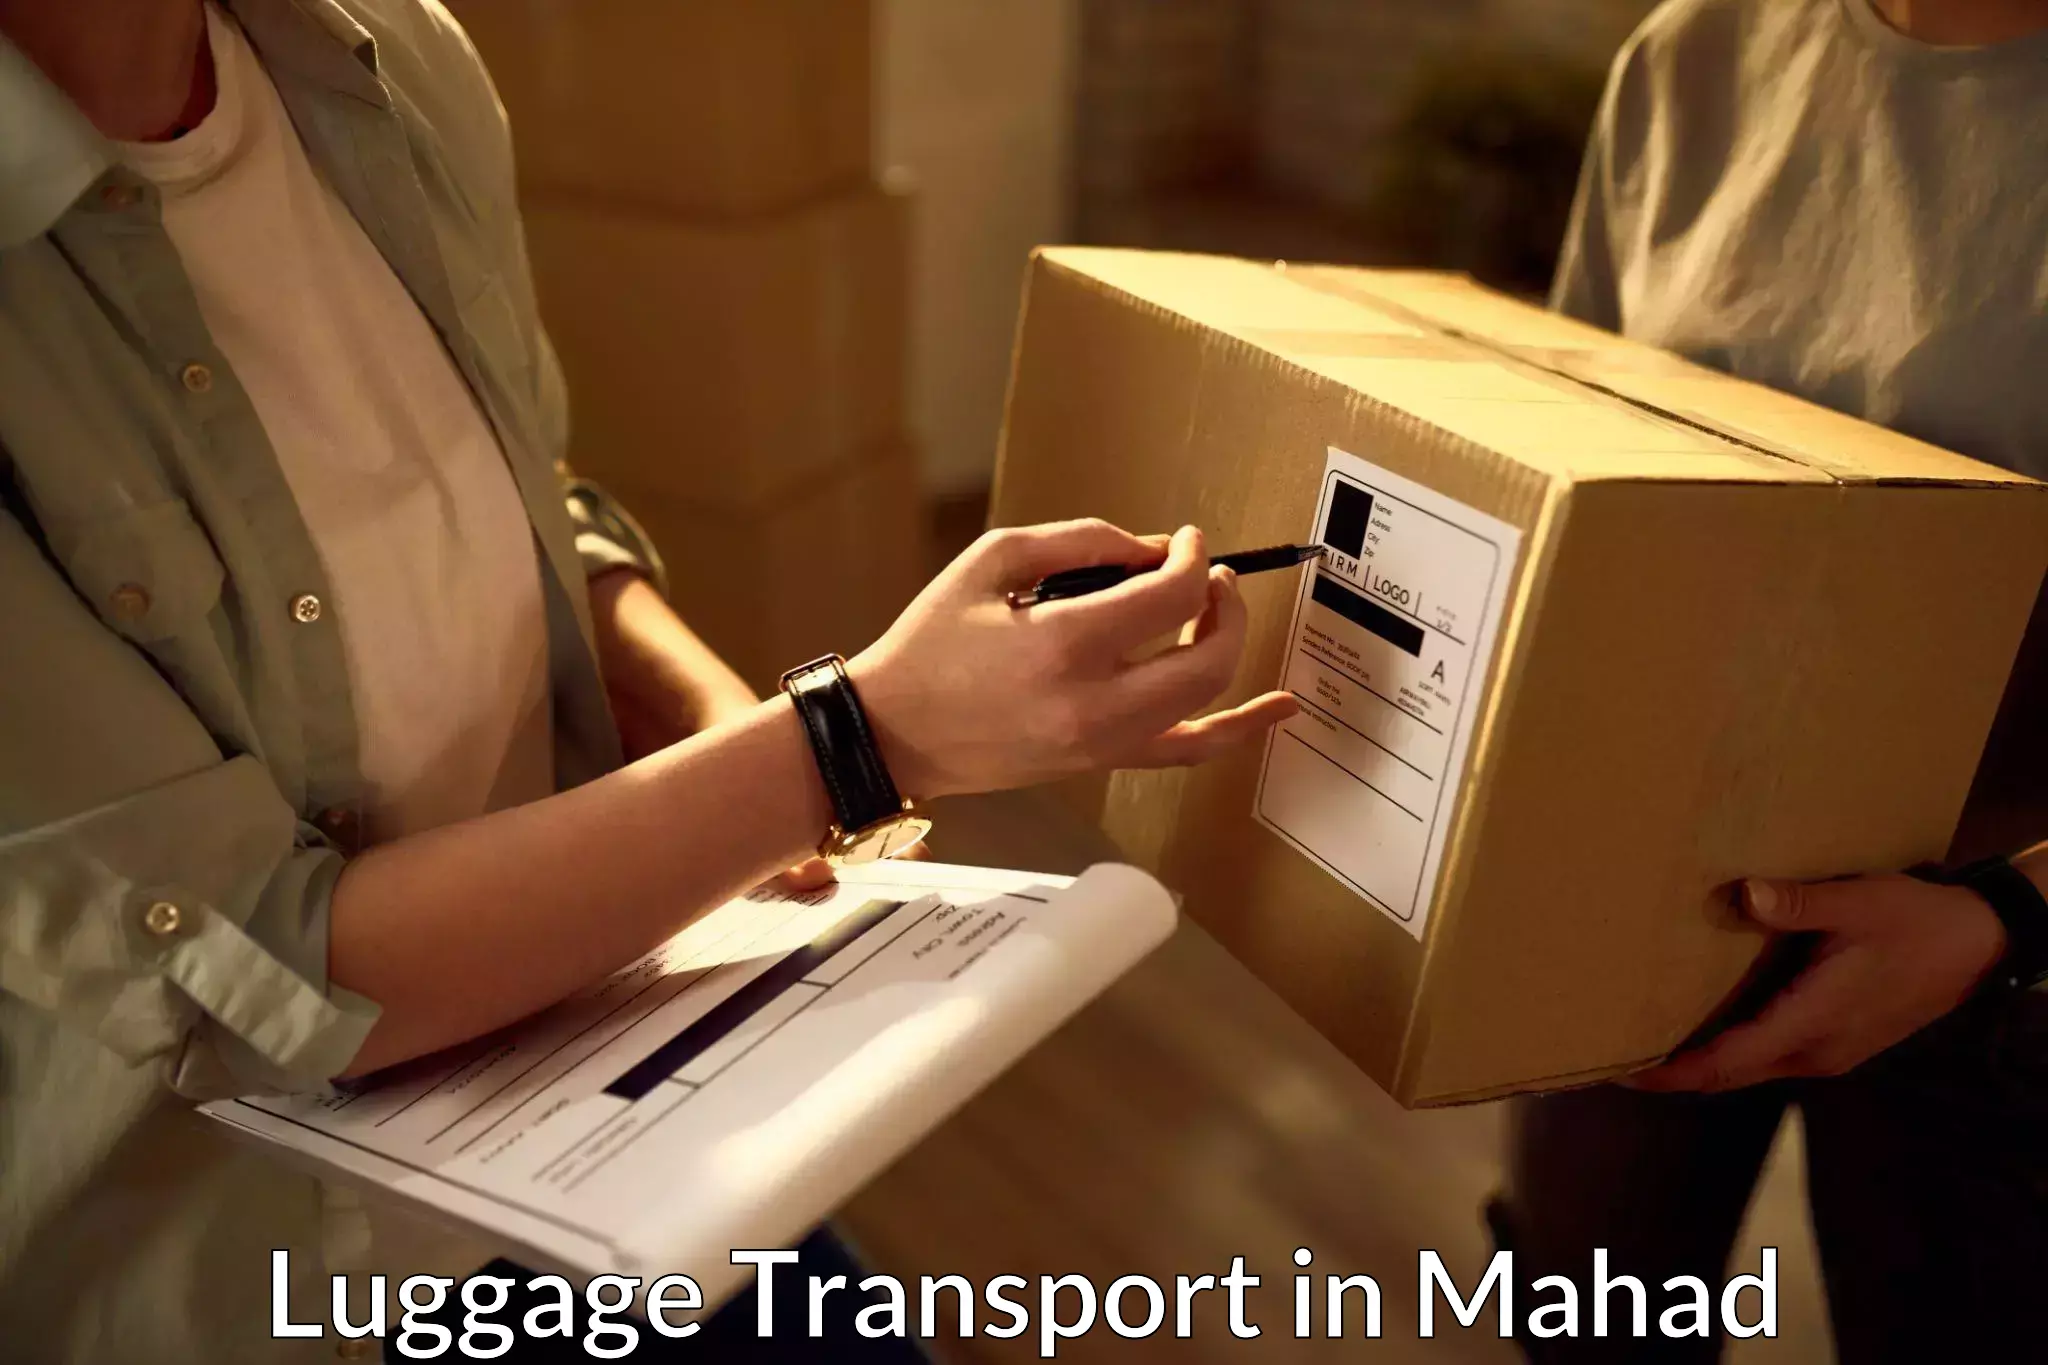 Tailored baggage transport in Mahad